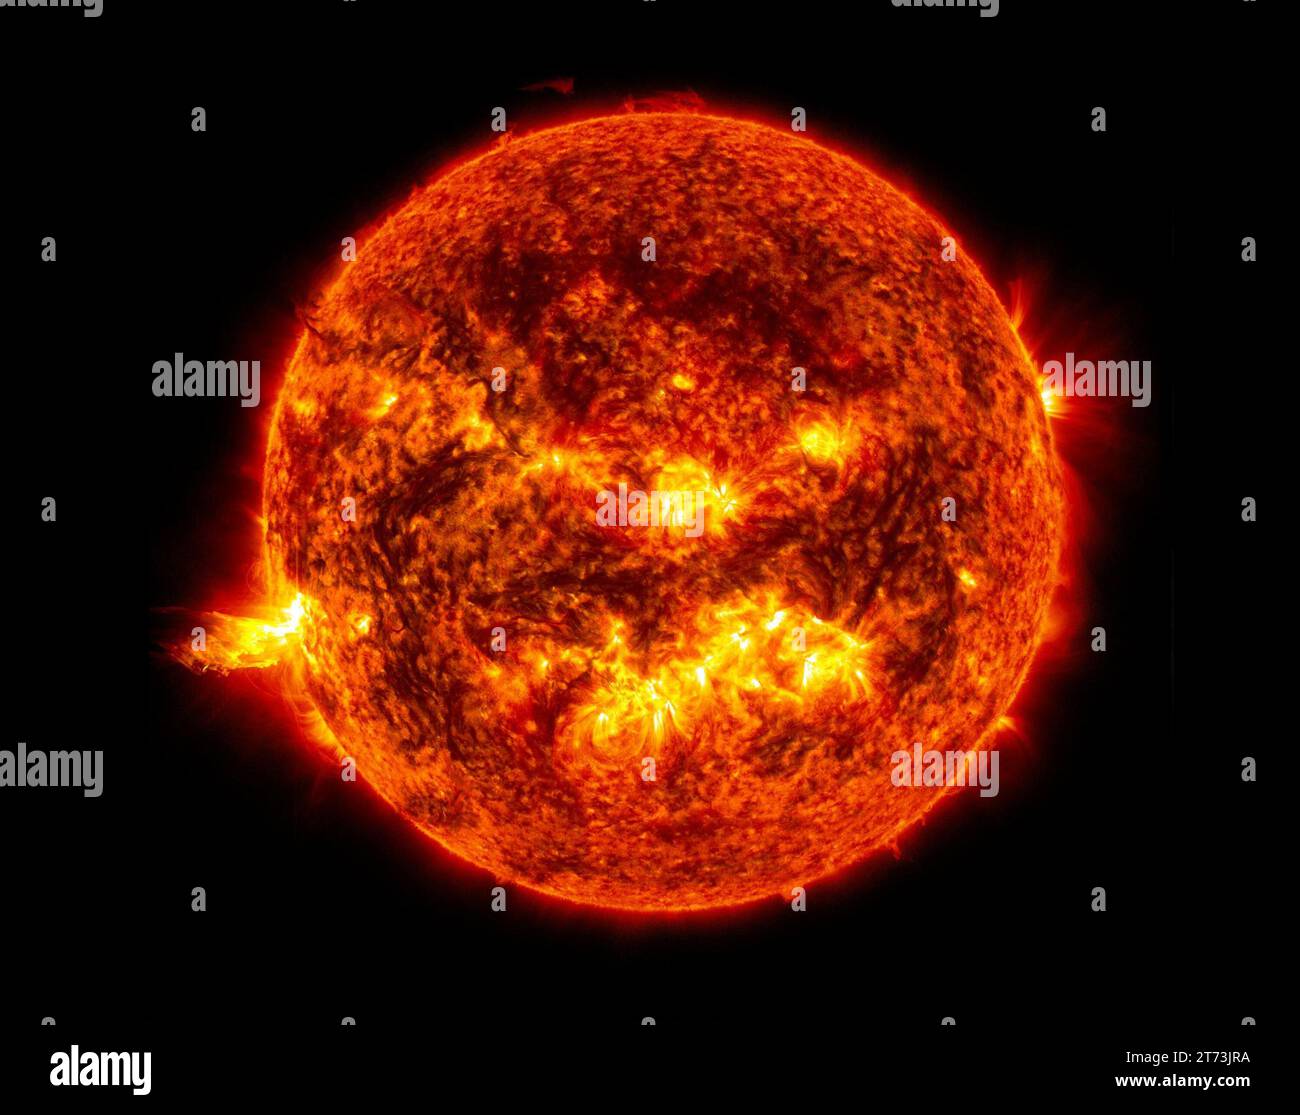 This image from June 20, 2013, at 11:15 p.m. EDT shows the bright light of a solar flare on the left side of the sun and an eruption of solar material Stock Photo